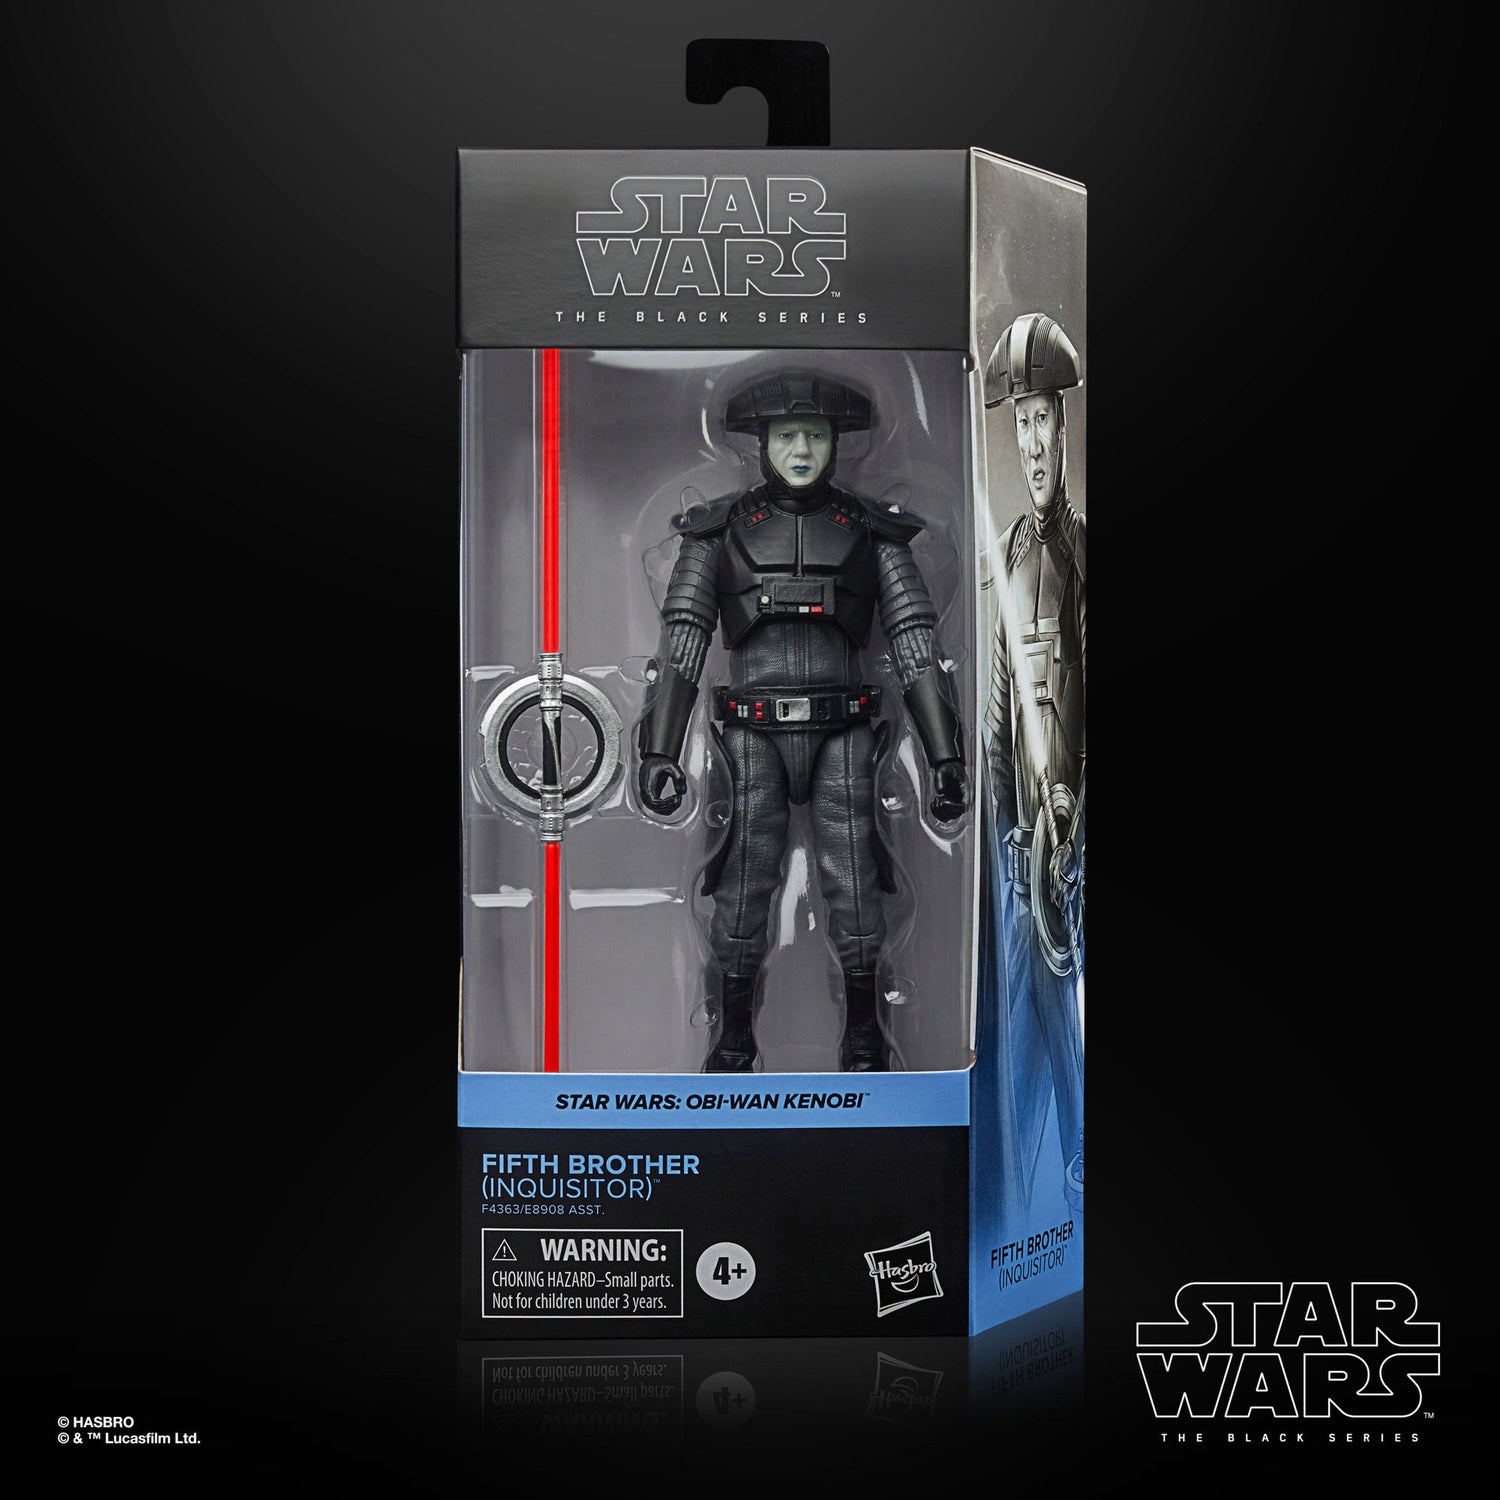 Star Wars: The Black Series Fifth Brother (INQUISITOR) Hasbro No Protector Case